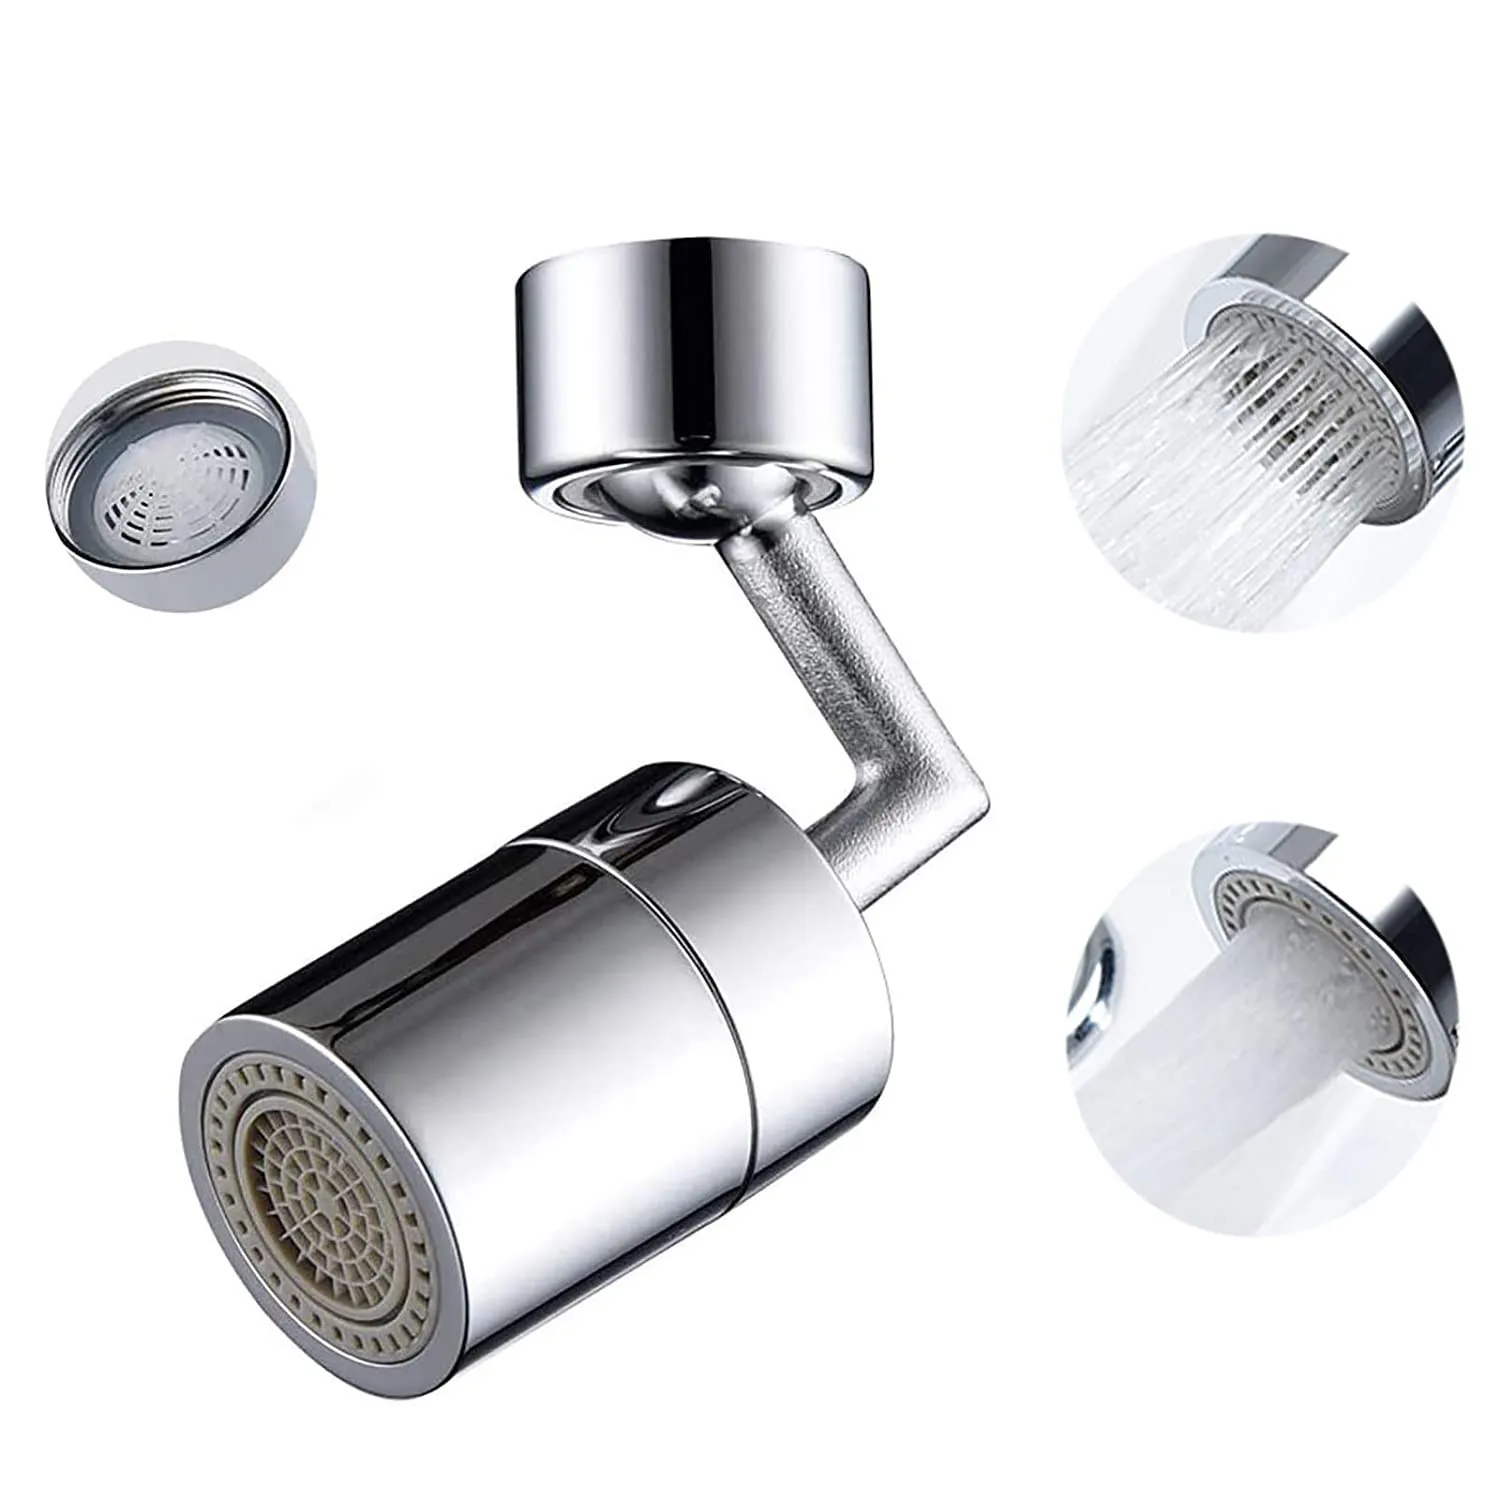 Kitchen Gadgets Faucet accessories Splash proof nozzle ABS material and stainless steel panel